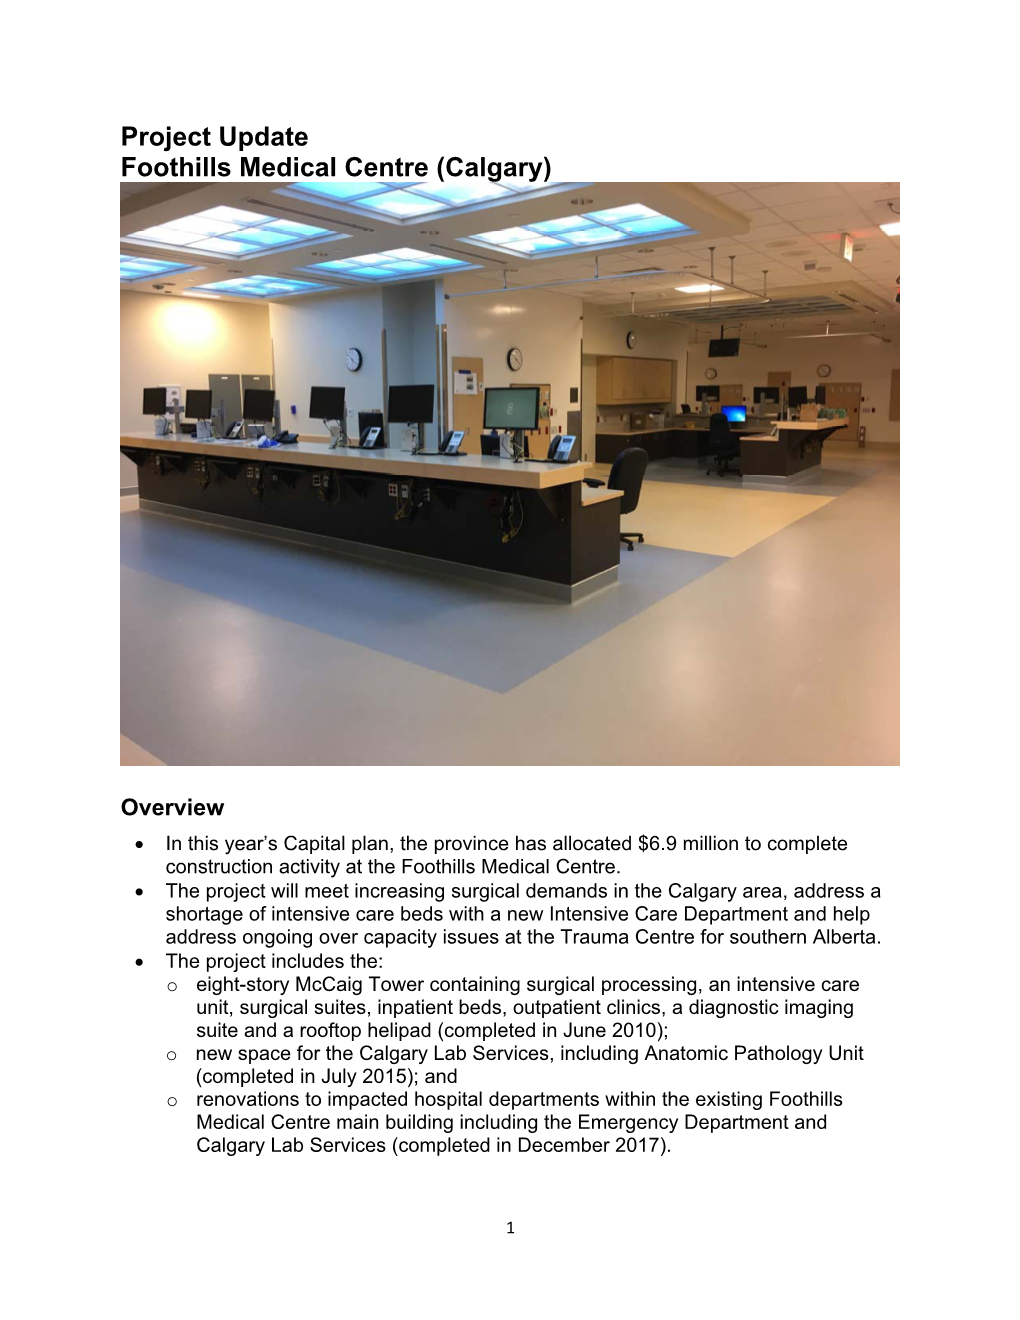 Project Update Foothills Medical Centre (Calgary)